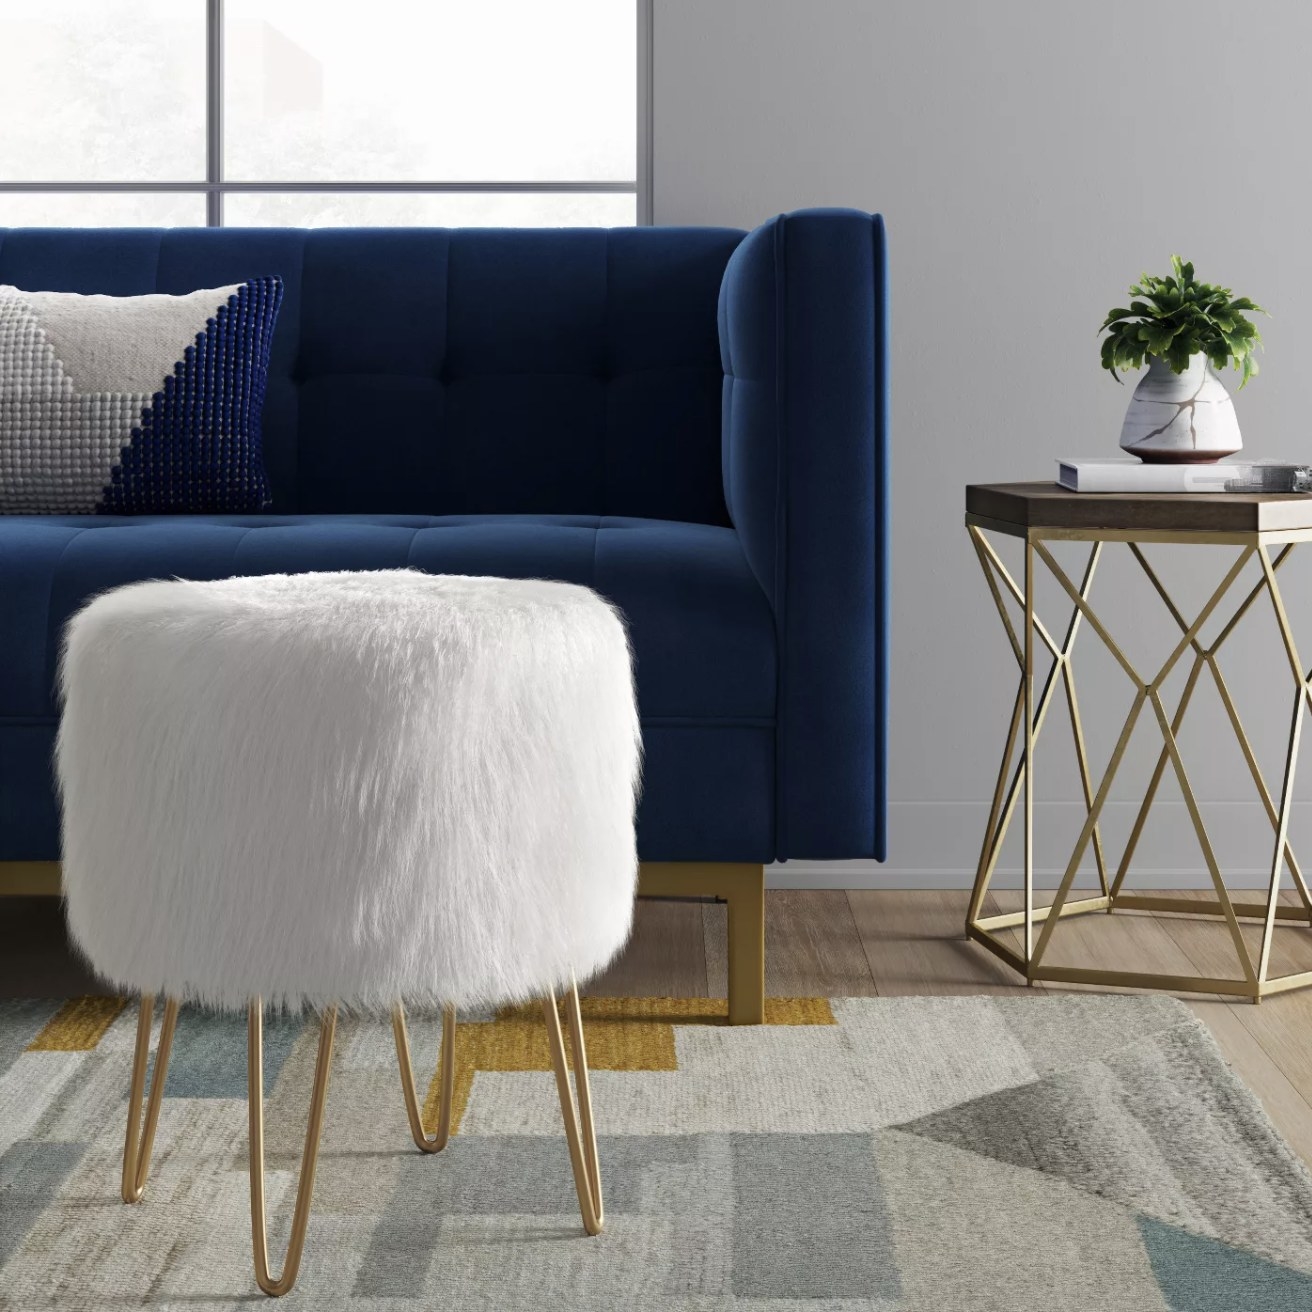 A white faux fur ottoman with gold hairpin legs